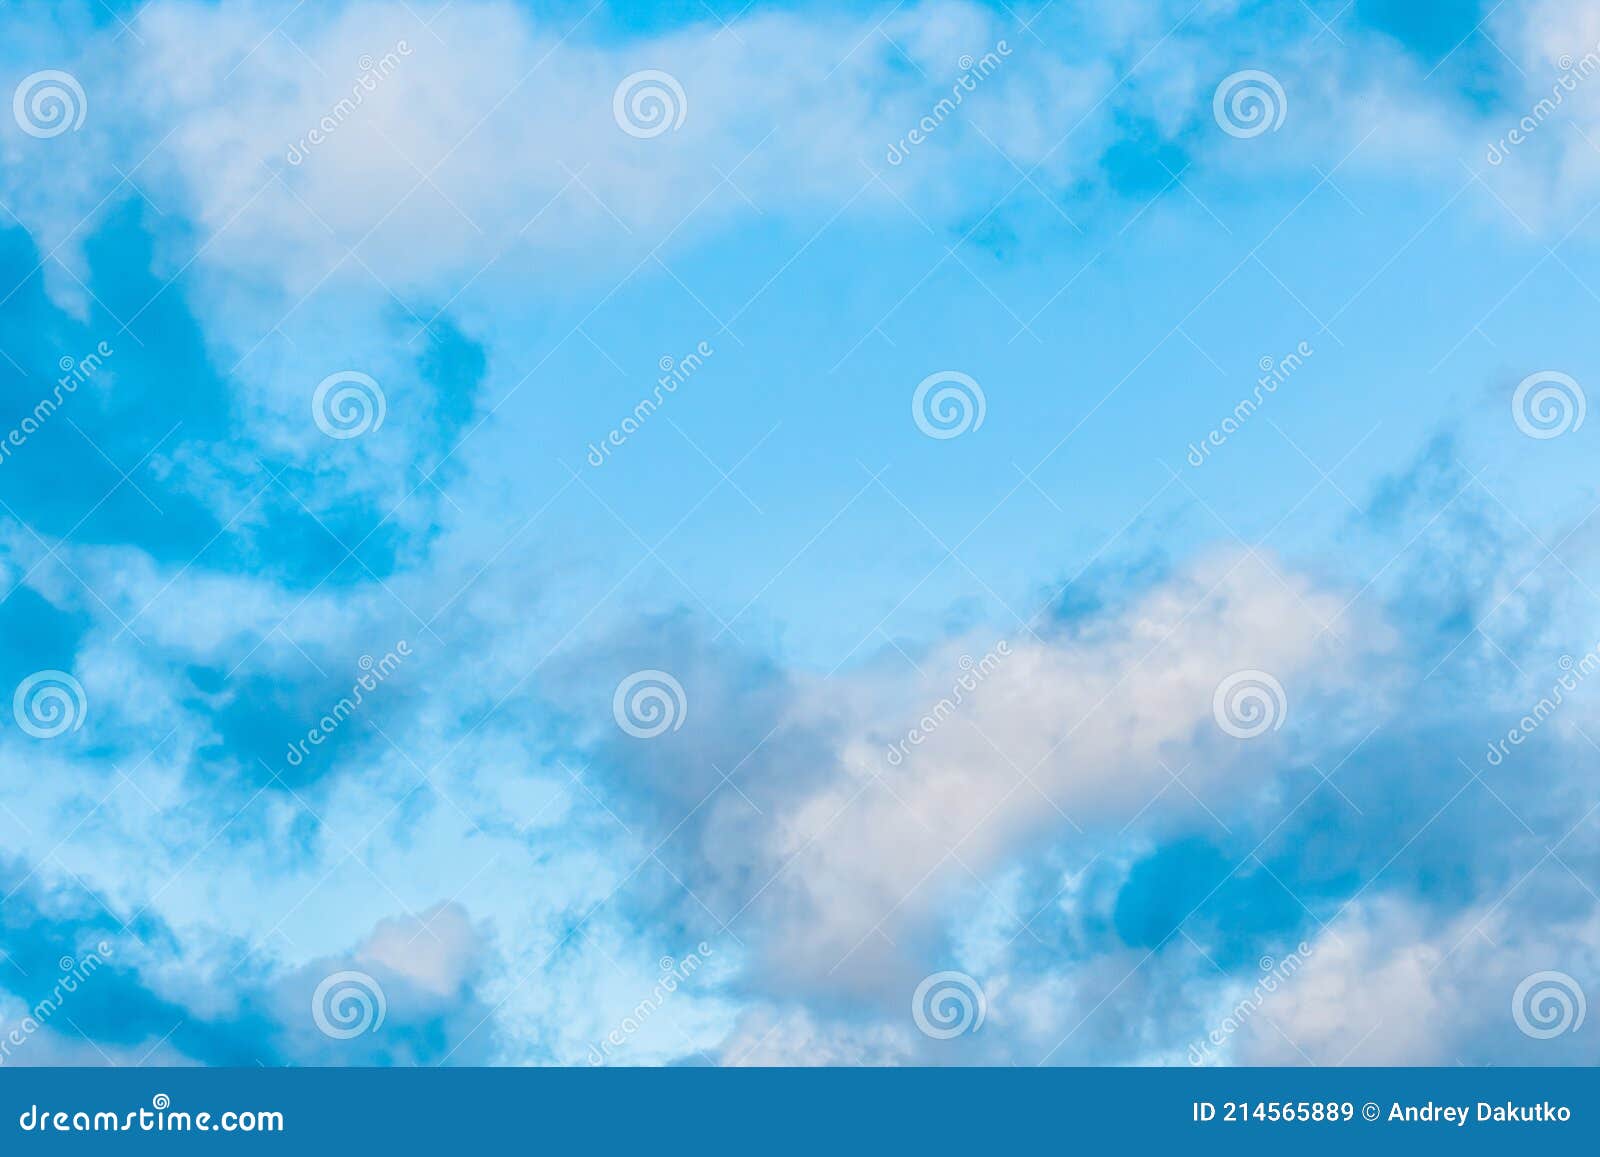 Blue Day Sky with Light and Dark Clouds Natural Background Stock Image ...